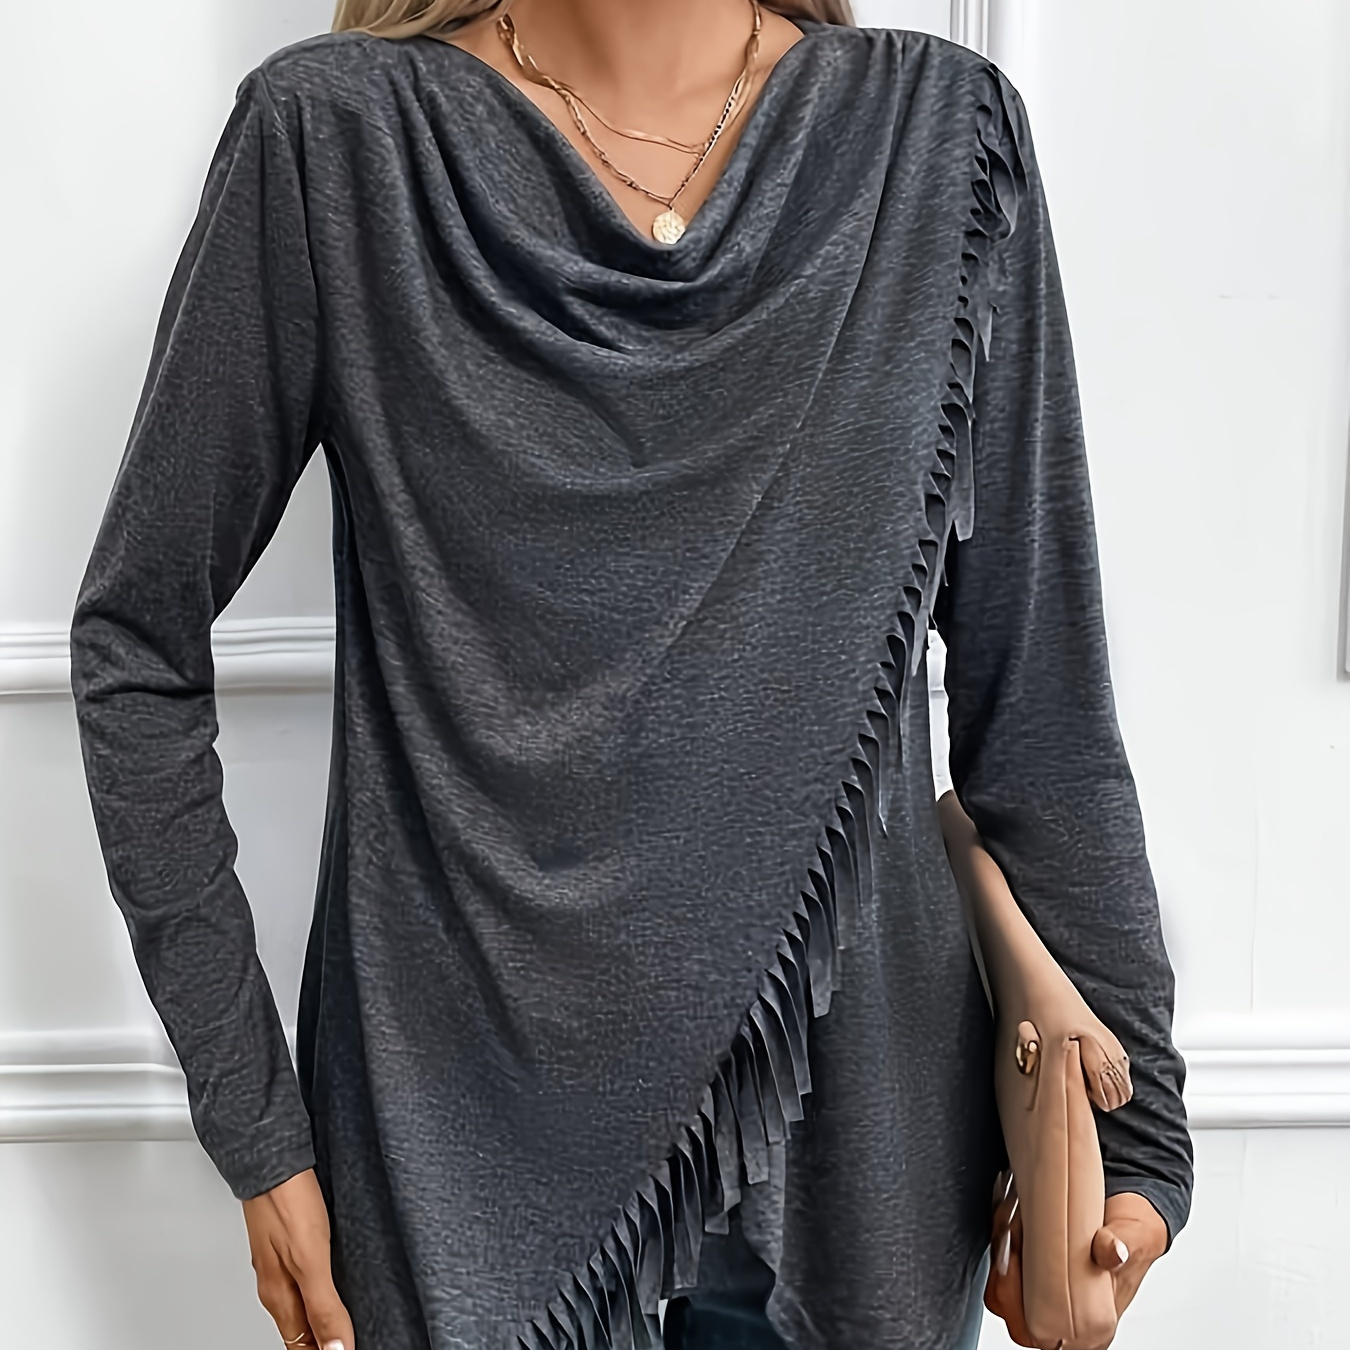 

Fringe Trim Cowl Neck T-shirt, Casual Long Sleeve Top For Spring & Fall, Women's Clothing